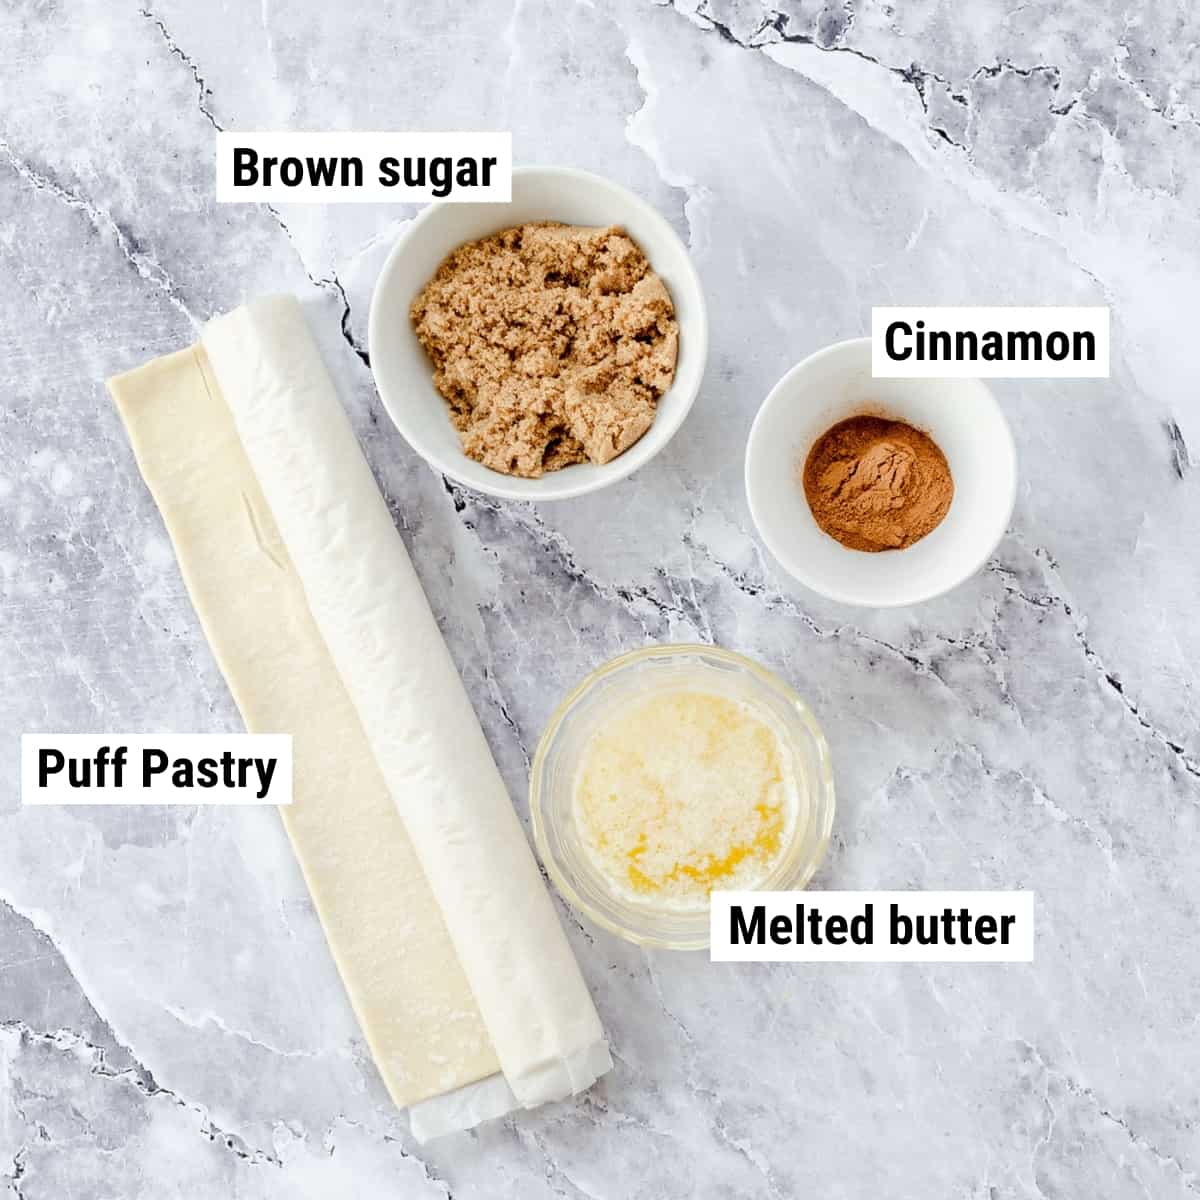 The ingredients to make puff pastry cinnamon twists laid out on a table.